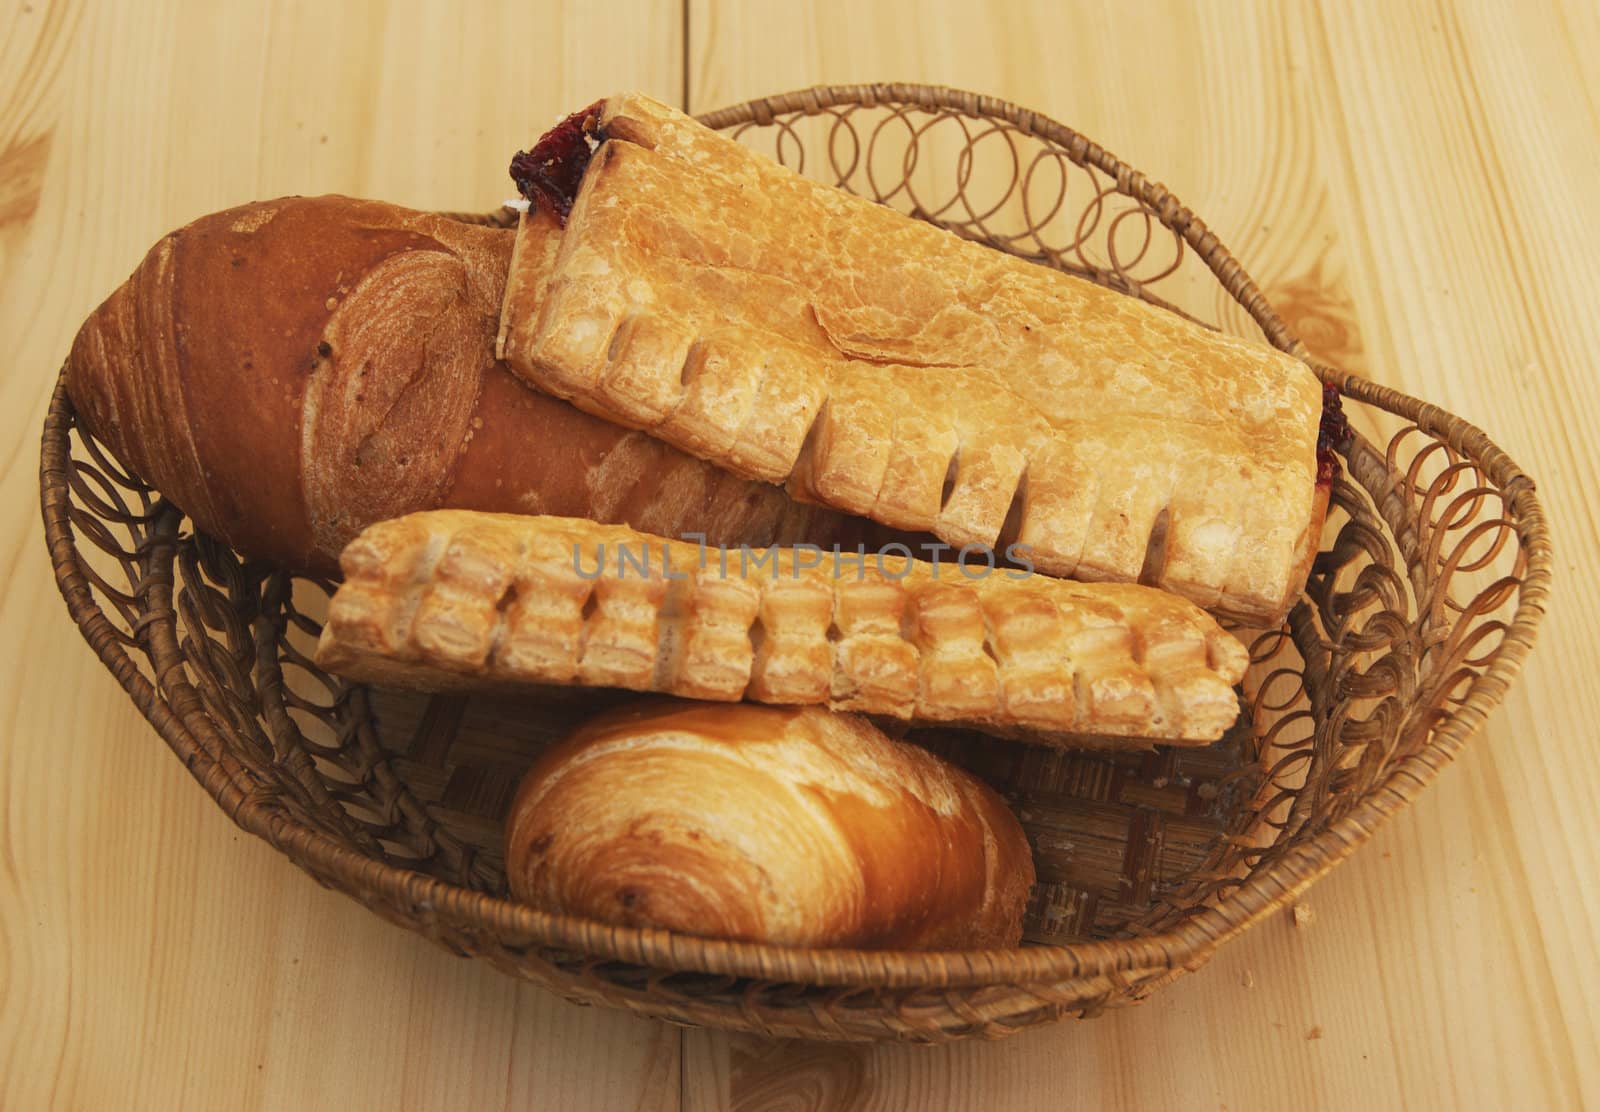 Bread and pastries in braided basket on table